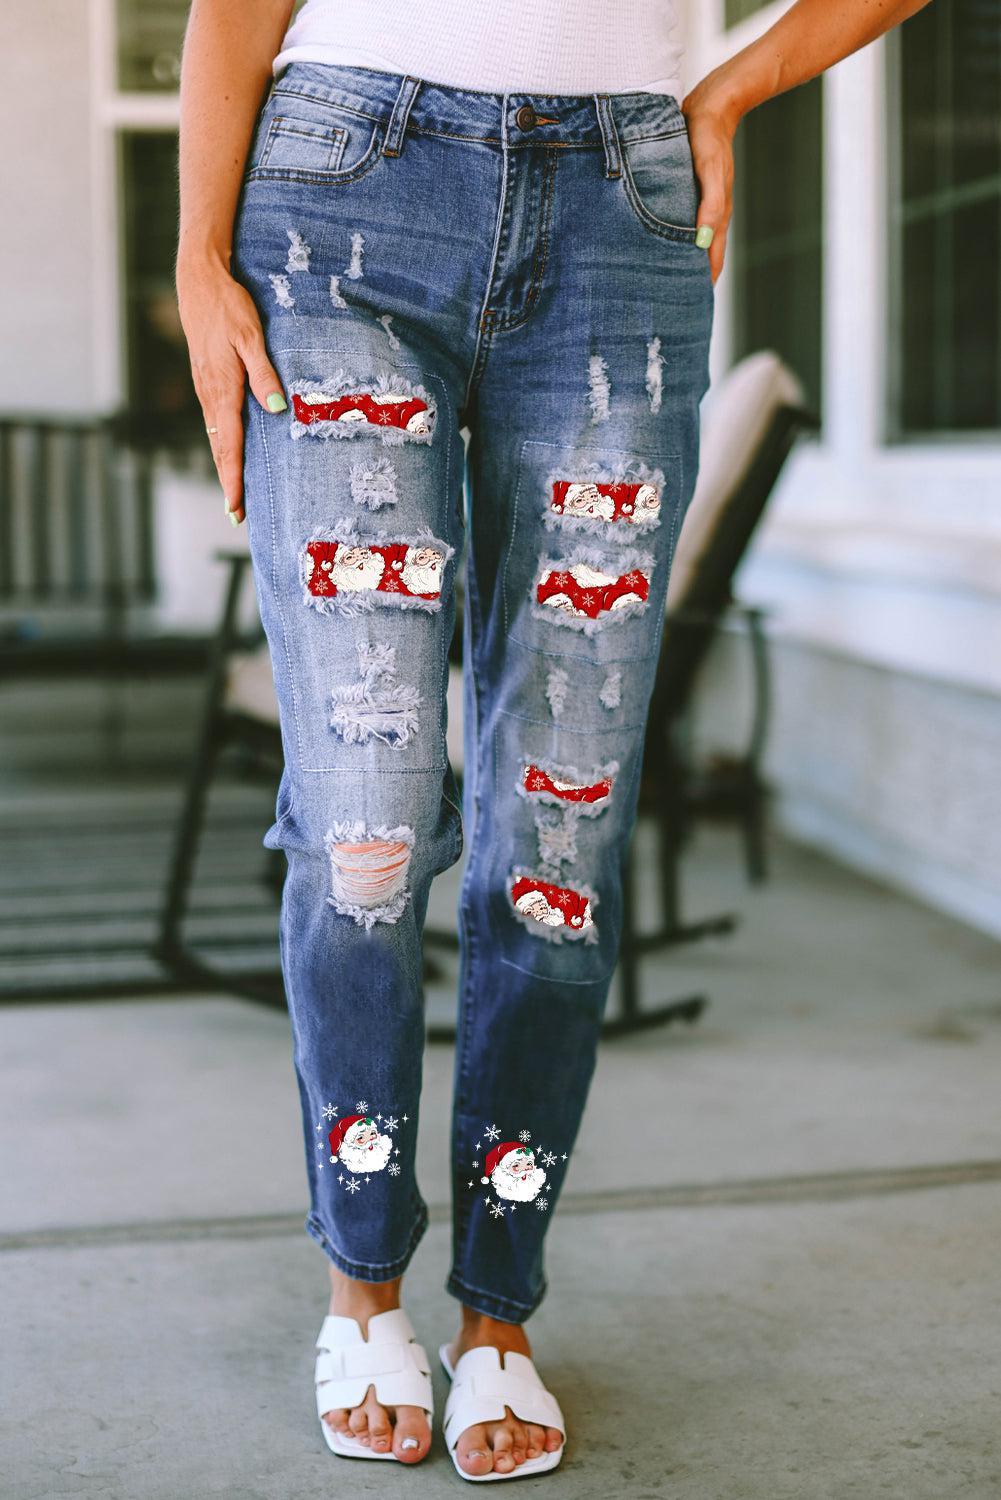 a woman wearing ripped jeans with red and white patches